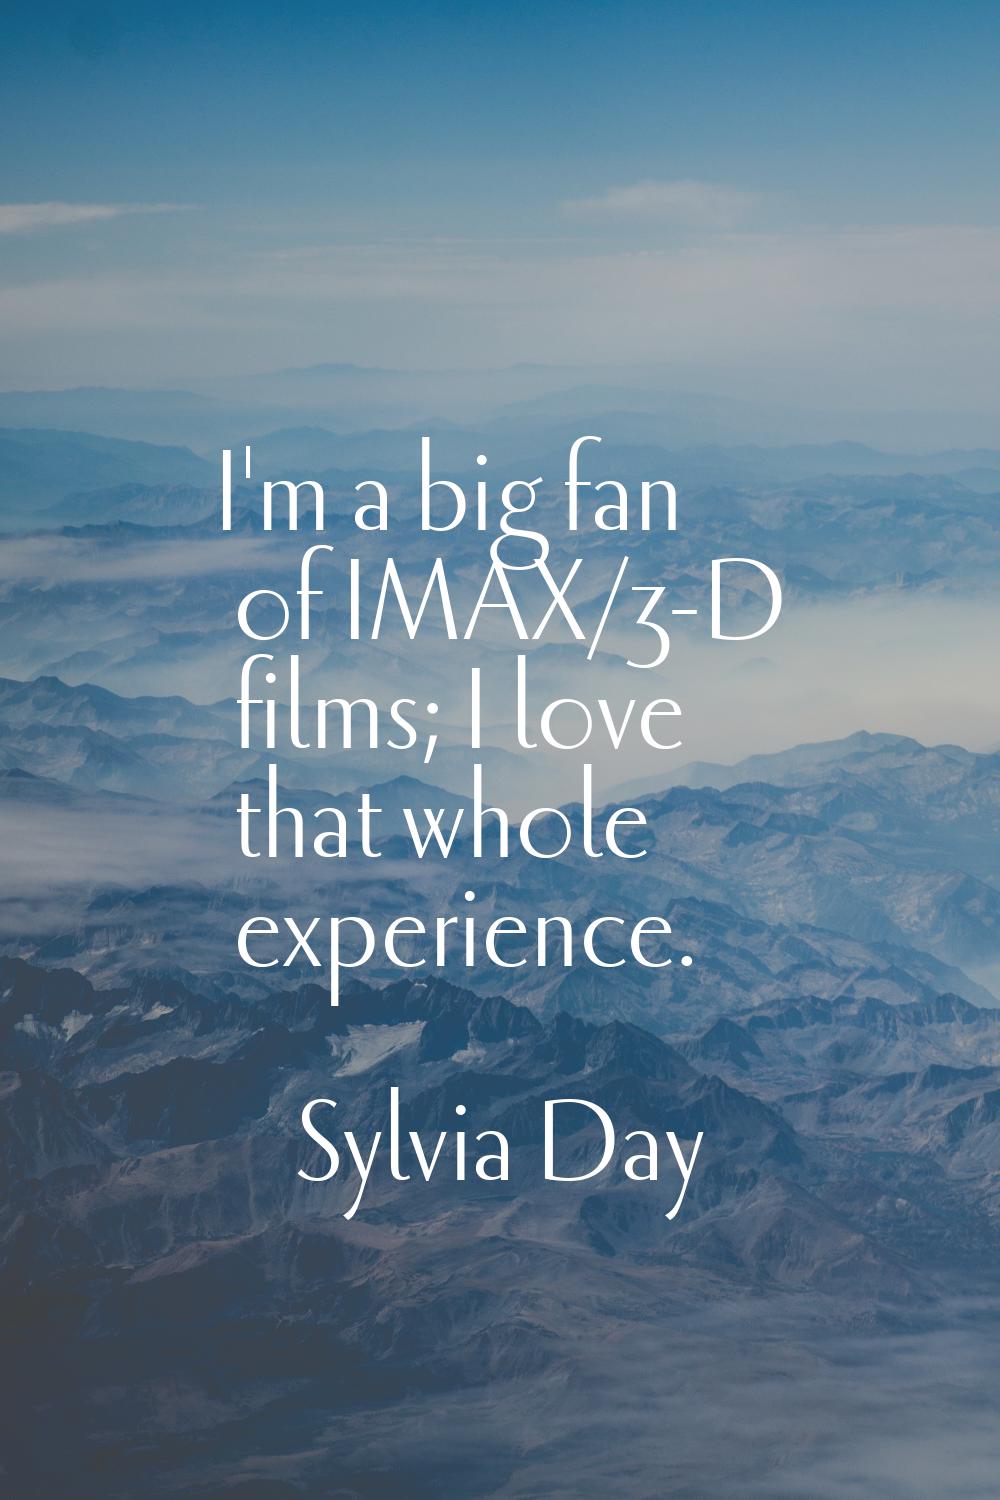 I'm a big fan of IMAX/3-D films; I love that whole experience.